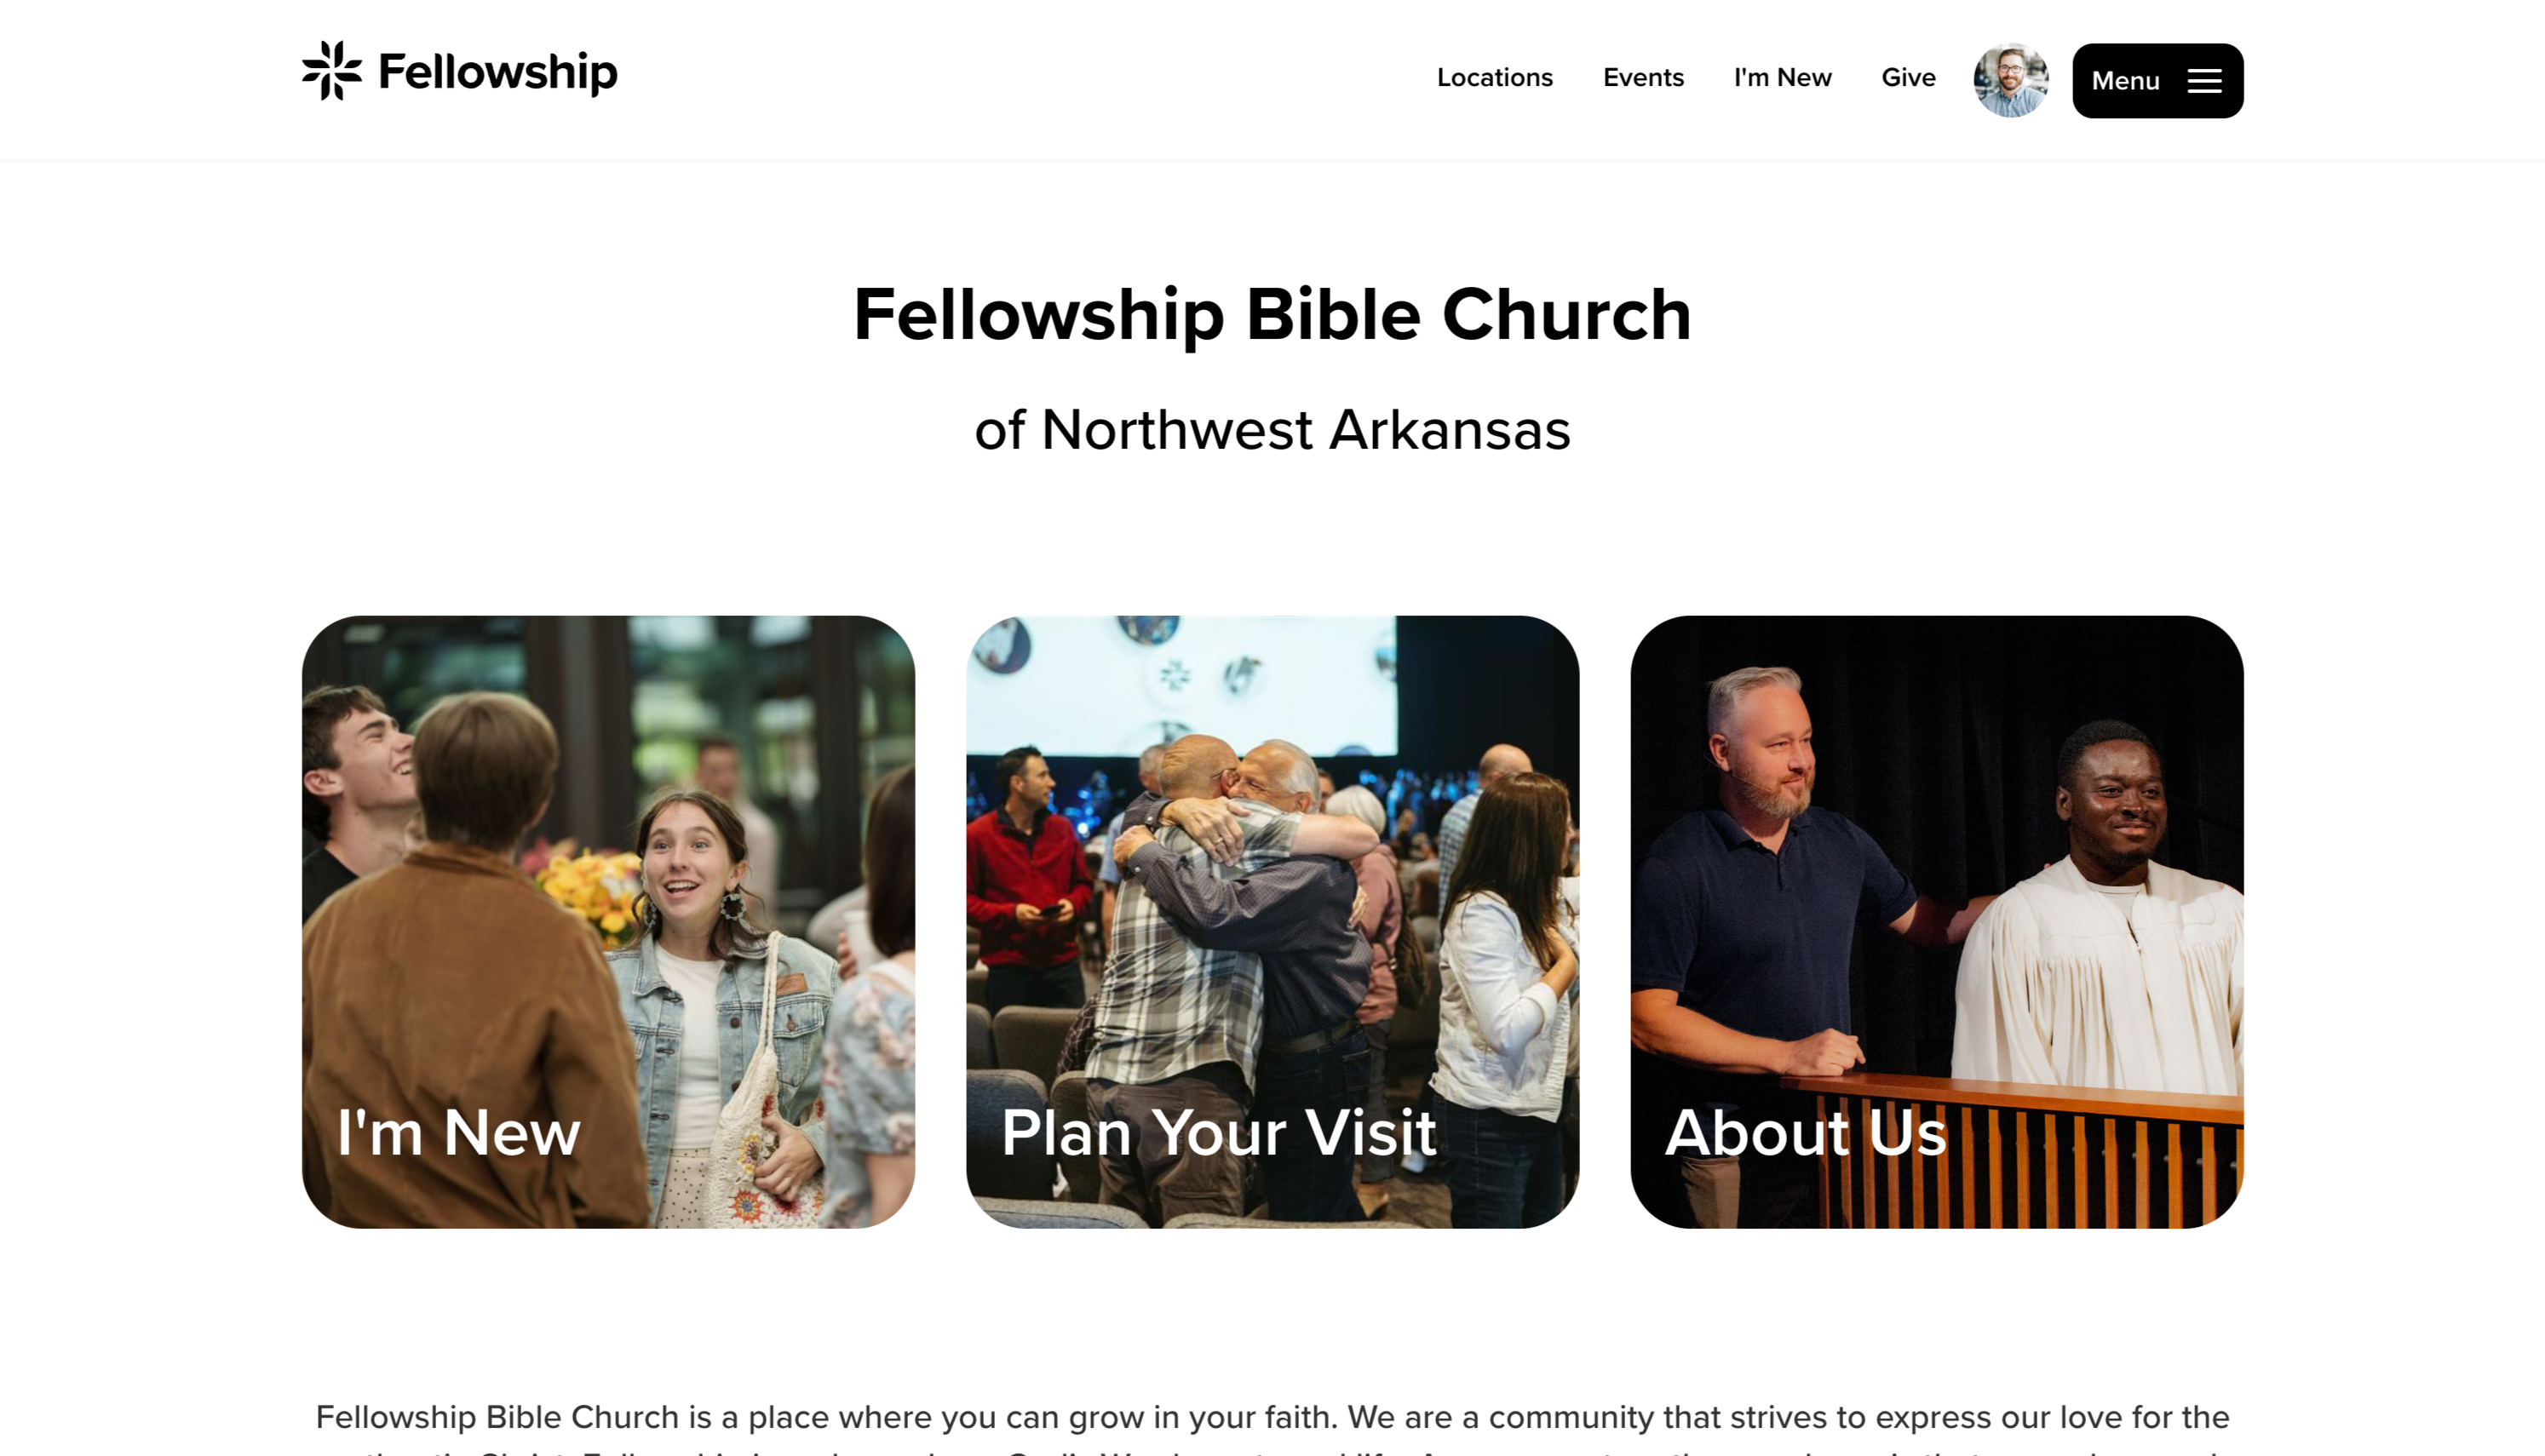 Website image from Fellowship Bible Church located in Northwest Arkansas.